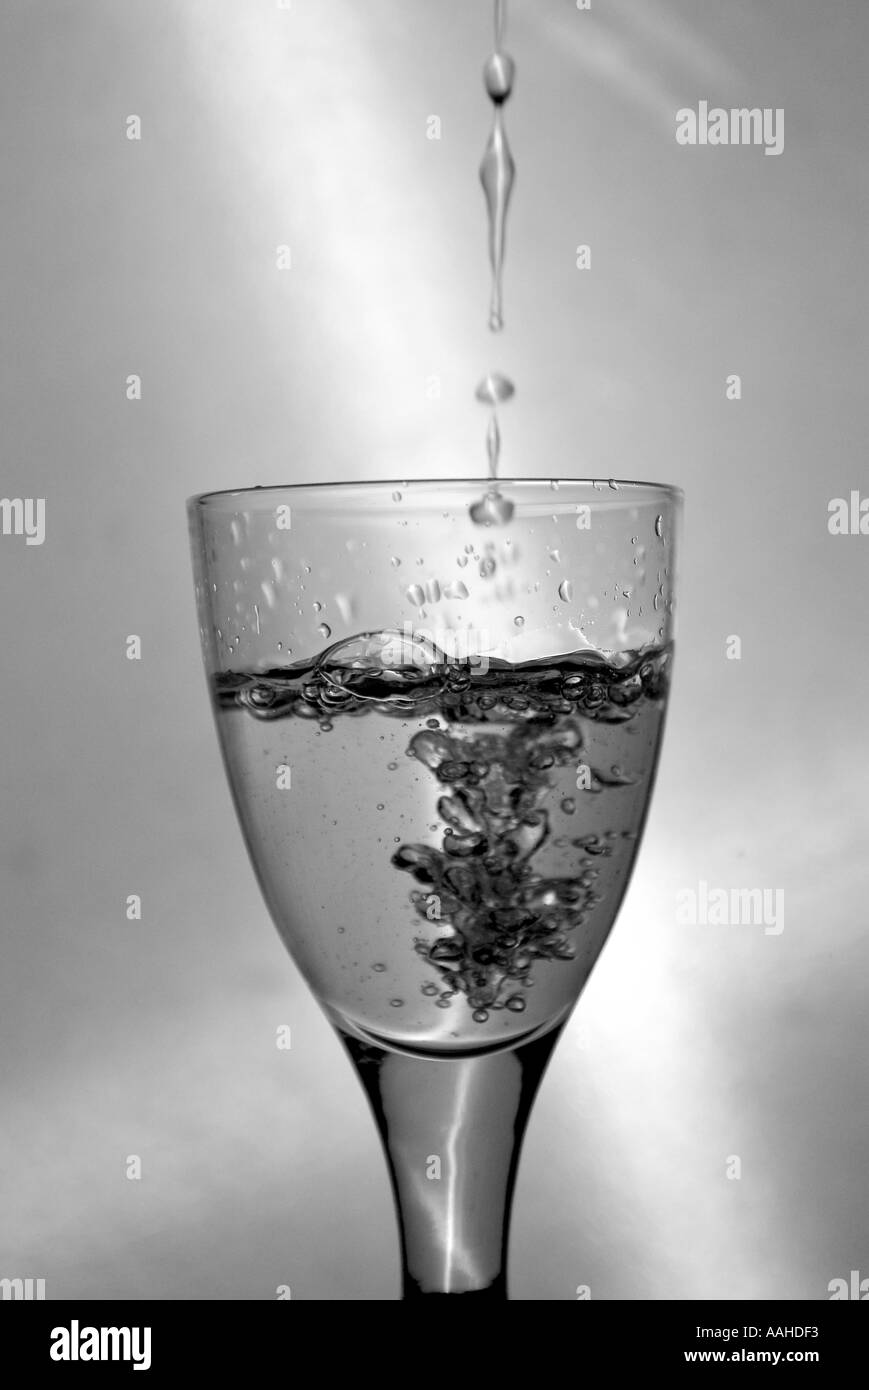 Glass water spill Black and White Stock Photos & Images - Alamy